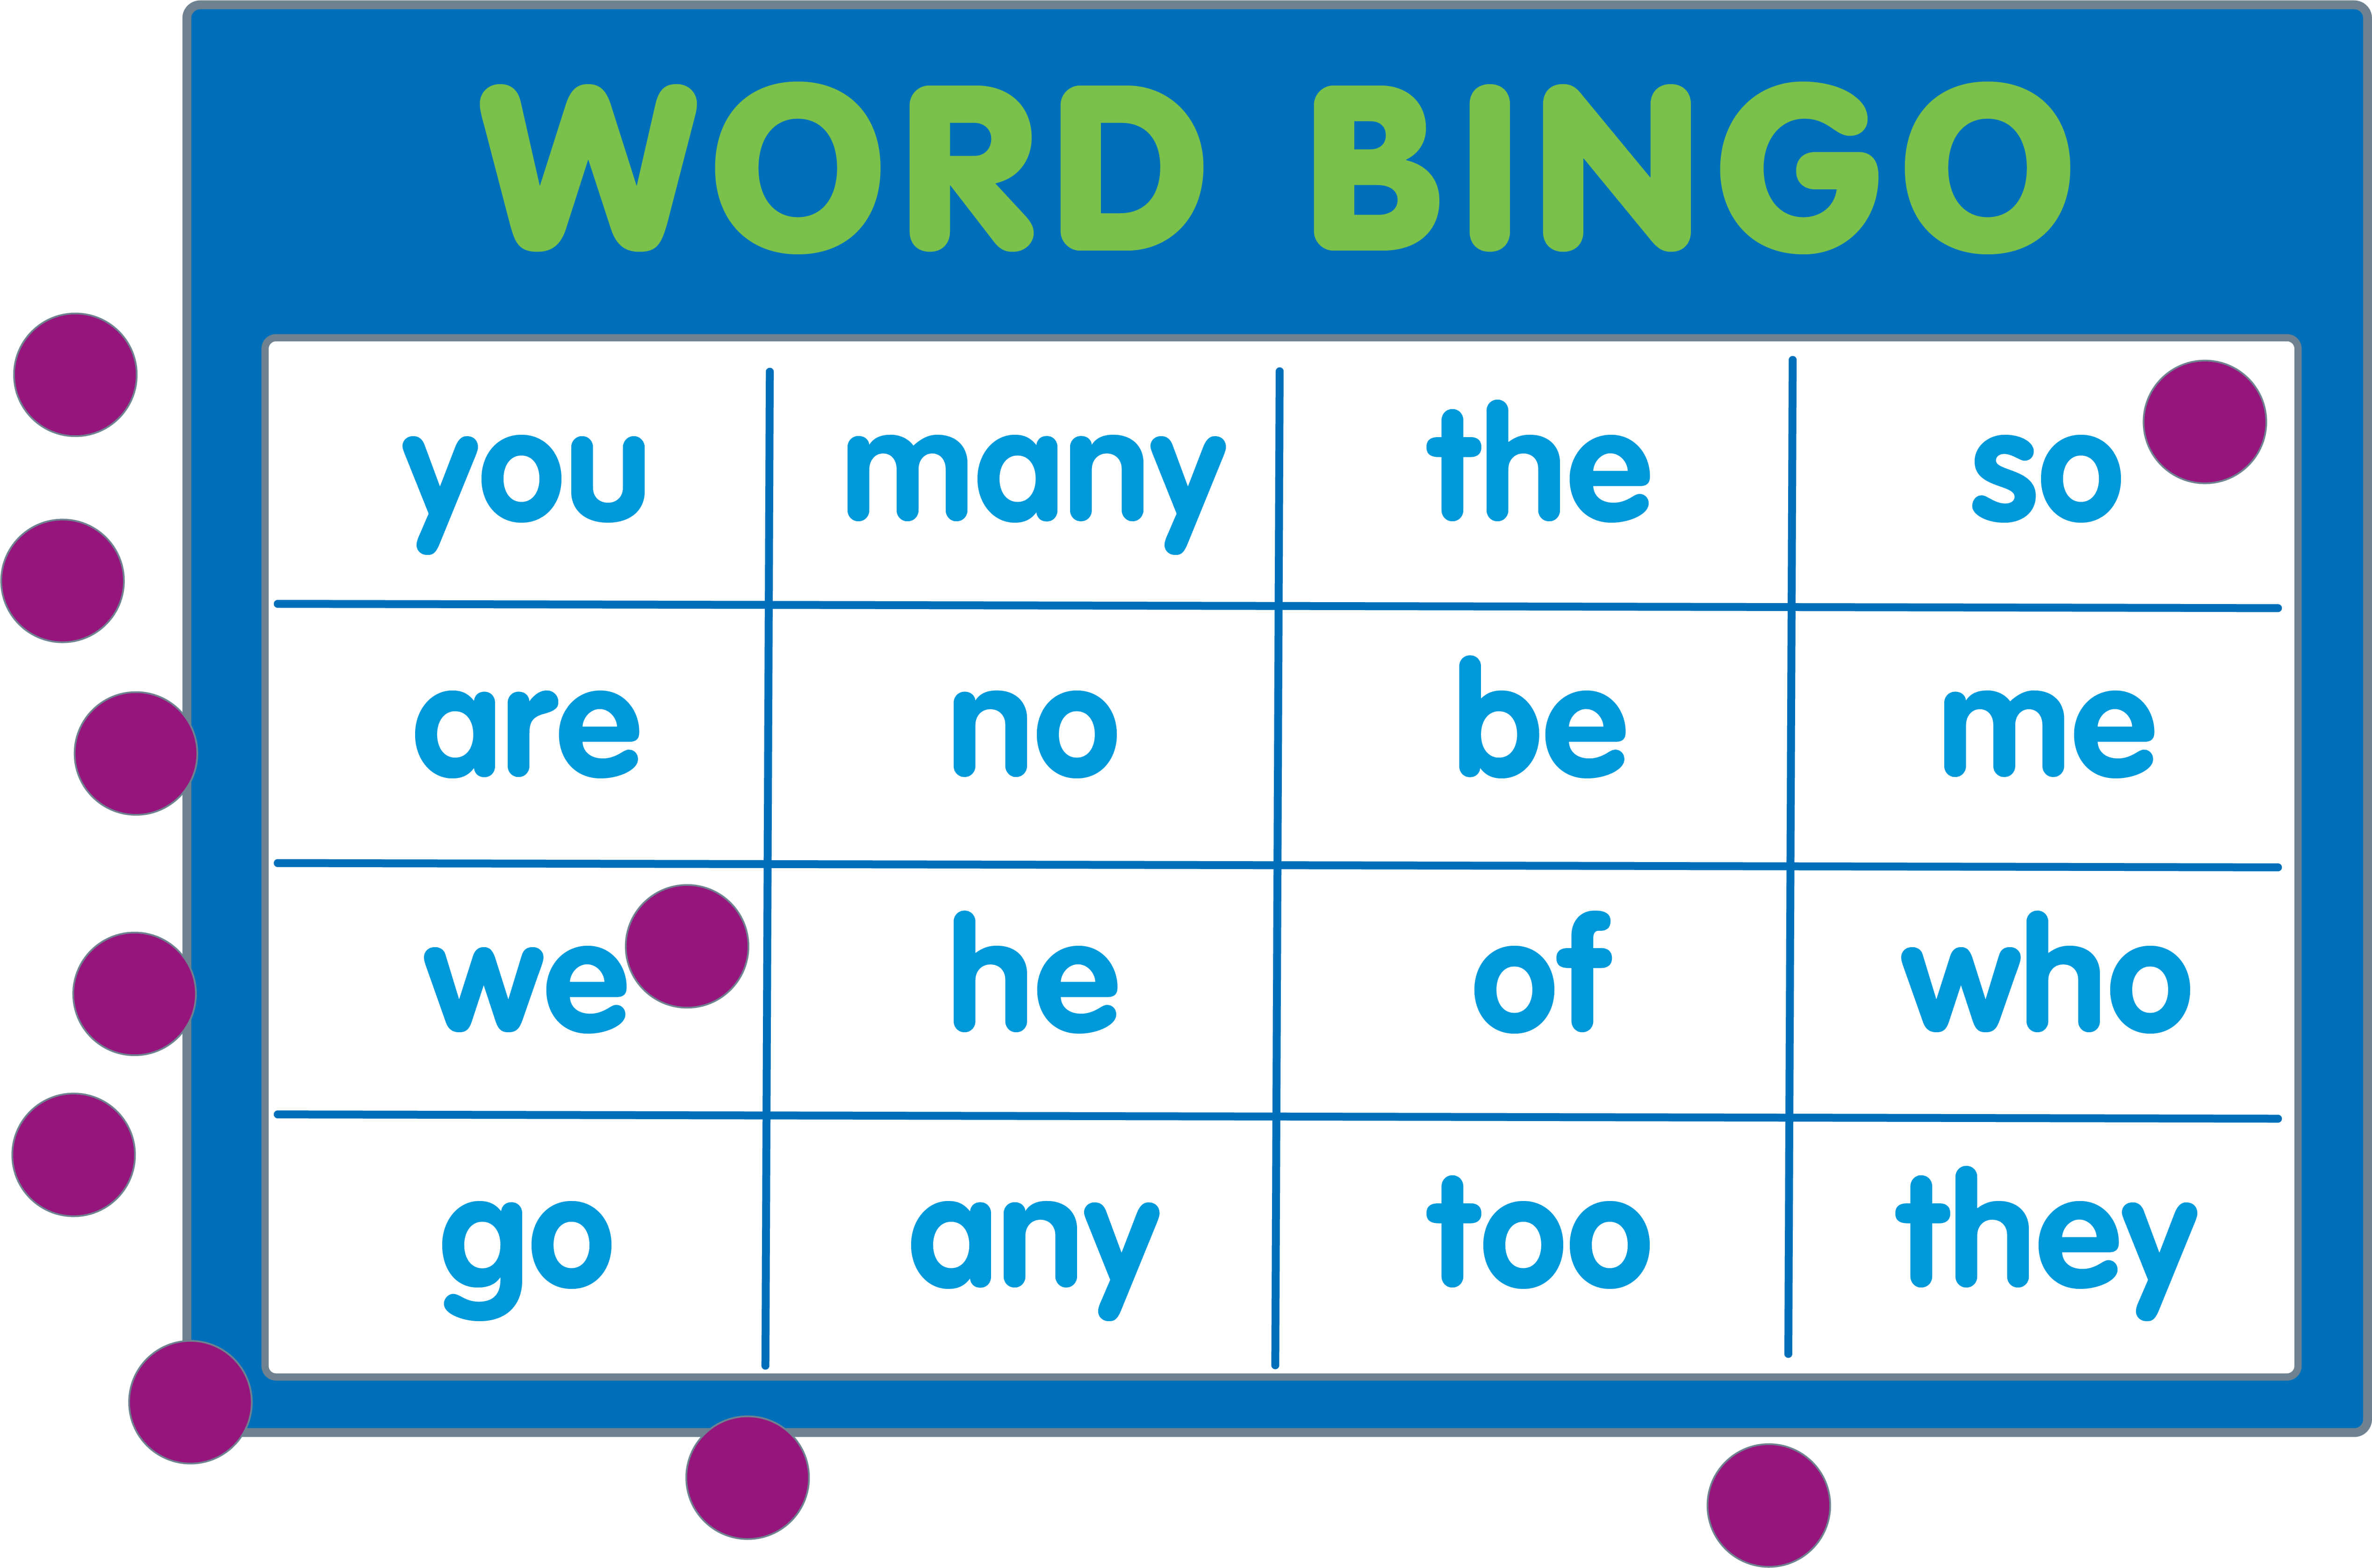 Bingo card with high-frequency words for a fun phonics game.